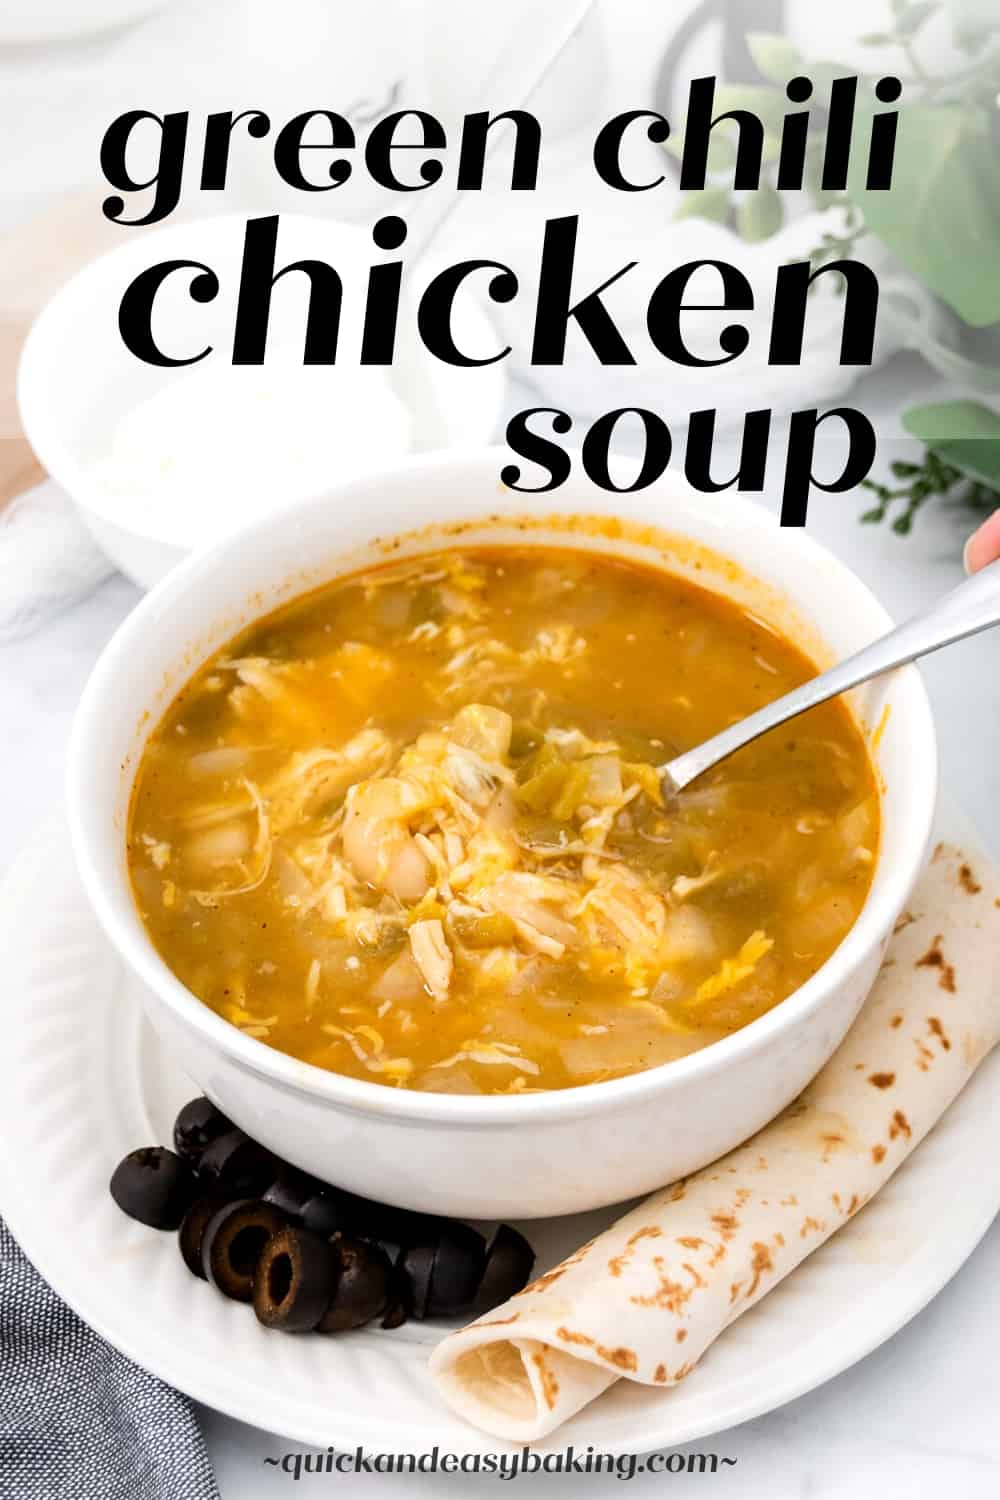 View of green chili chicken soup pinterest image with text overlay and blow of soup with a spoon.